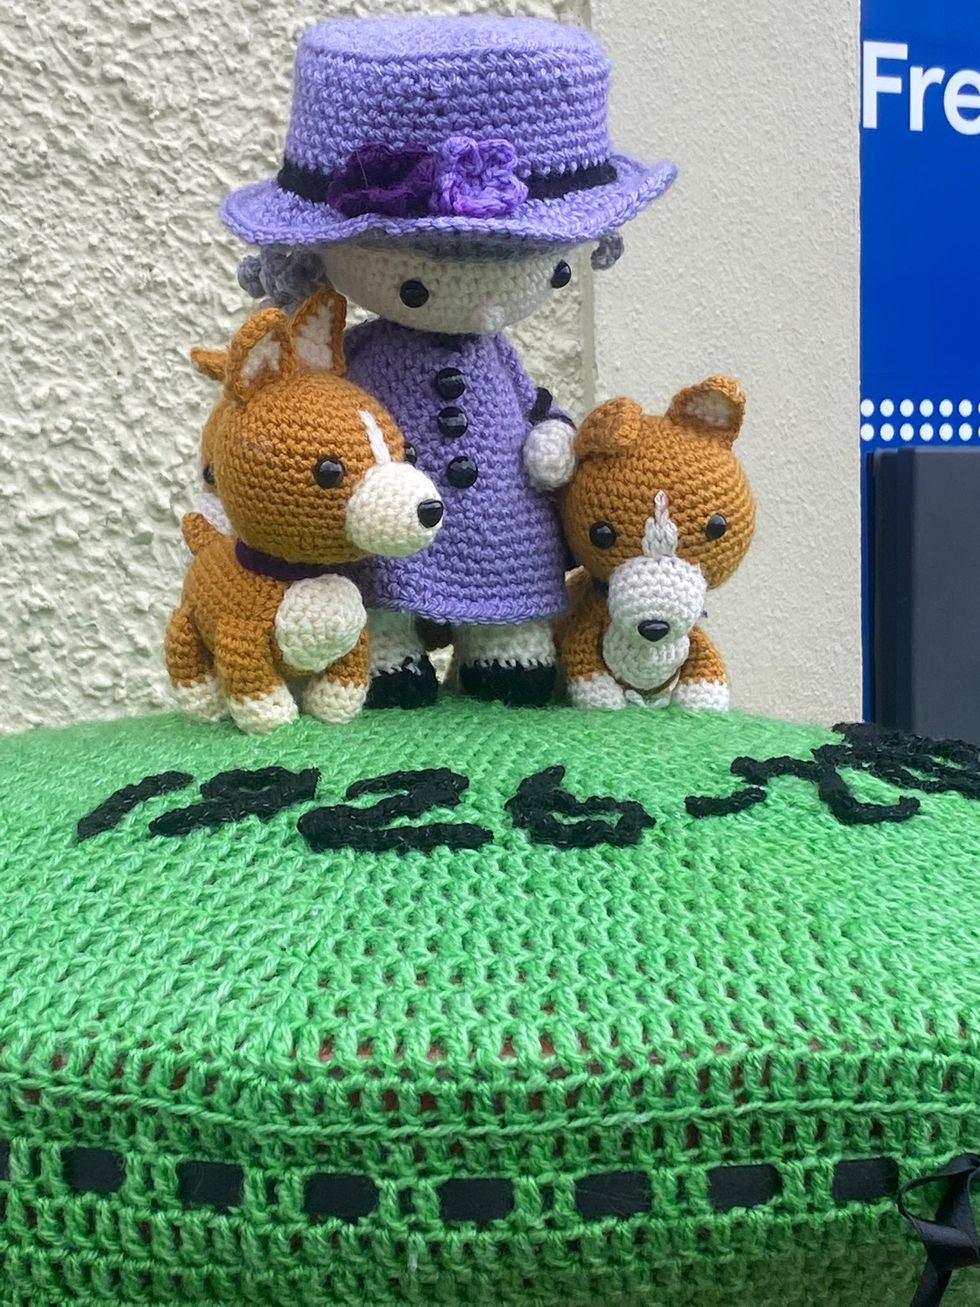 Crocheted tributes to Queen top post boxes across the UK